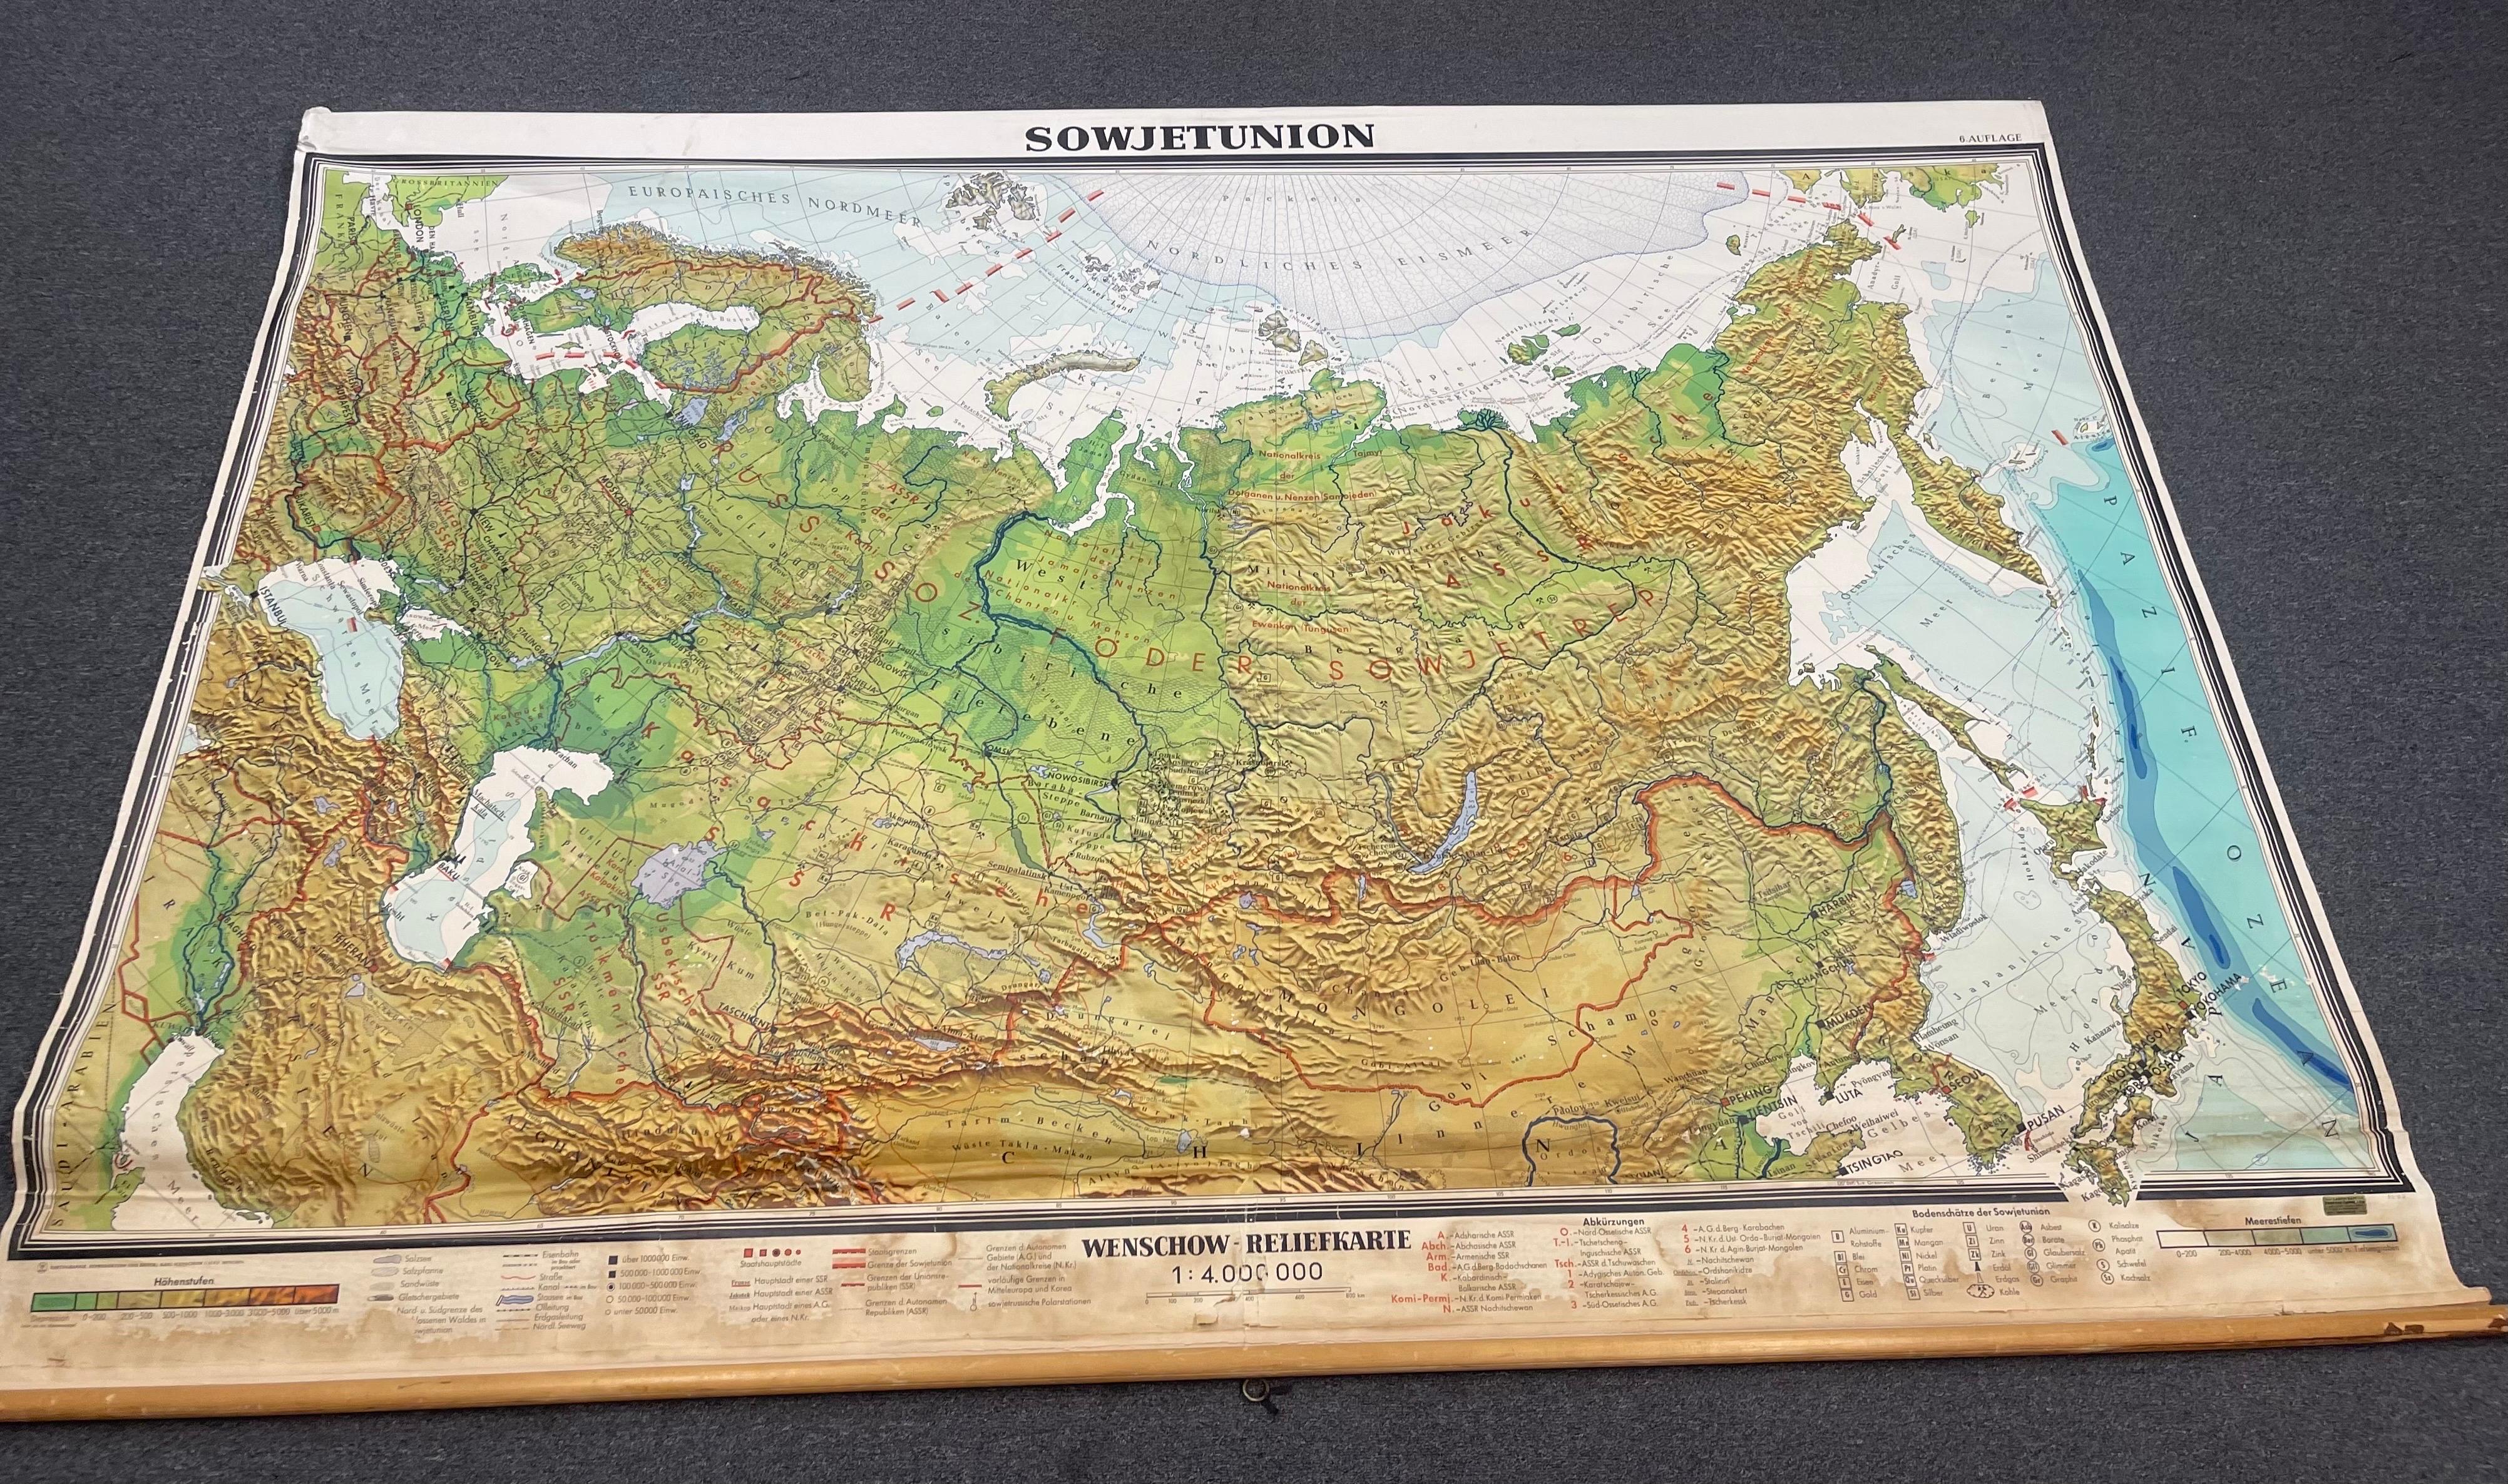 Massive Vintage Wall Map of the Soviet Union 'Sowjetunion' by Karl Wenschow For Sale 6